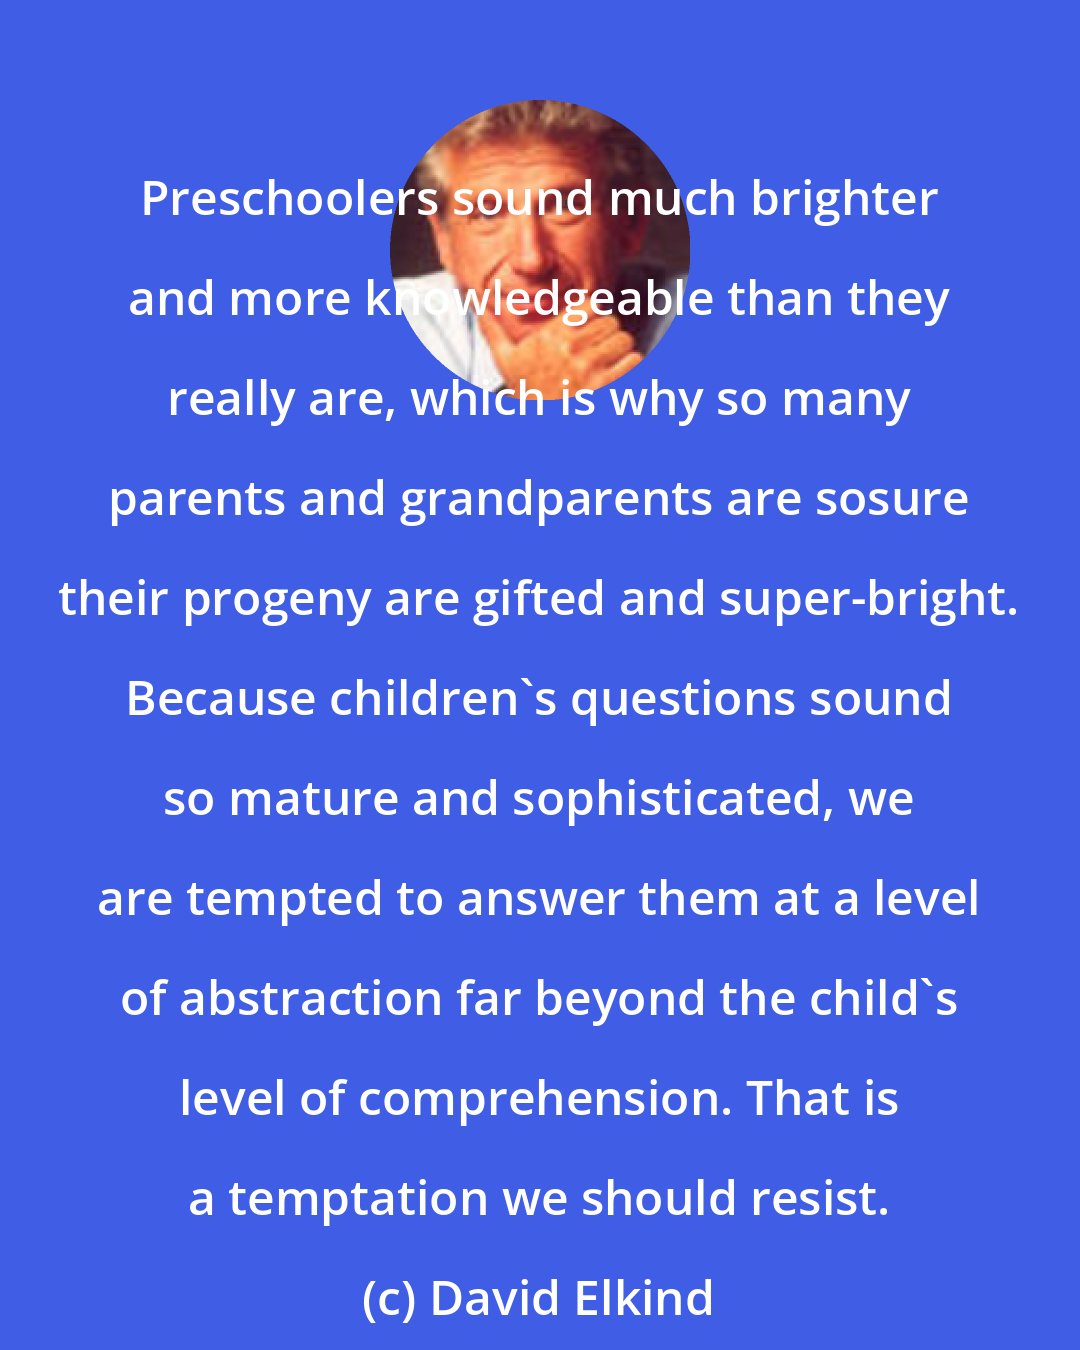 David Elkind: Preschoolers sound much brighter and more knowledgeable than they really are, which is why so many parents and grandparents are sosure their progeny are gifted and super-bright. Because children's questions sound so mature and sophisticated, we are tempted to answer them at a level of abstraction far beyond the child's level of comprehension. That is a temptation we should resist.